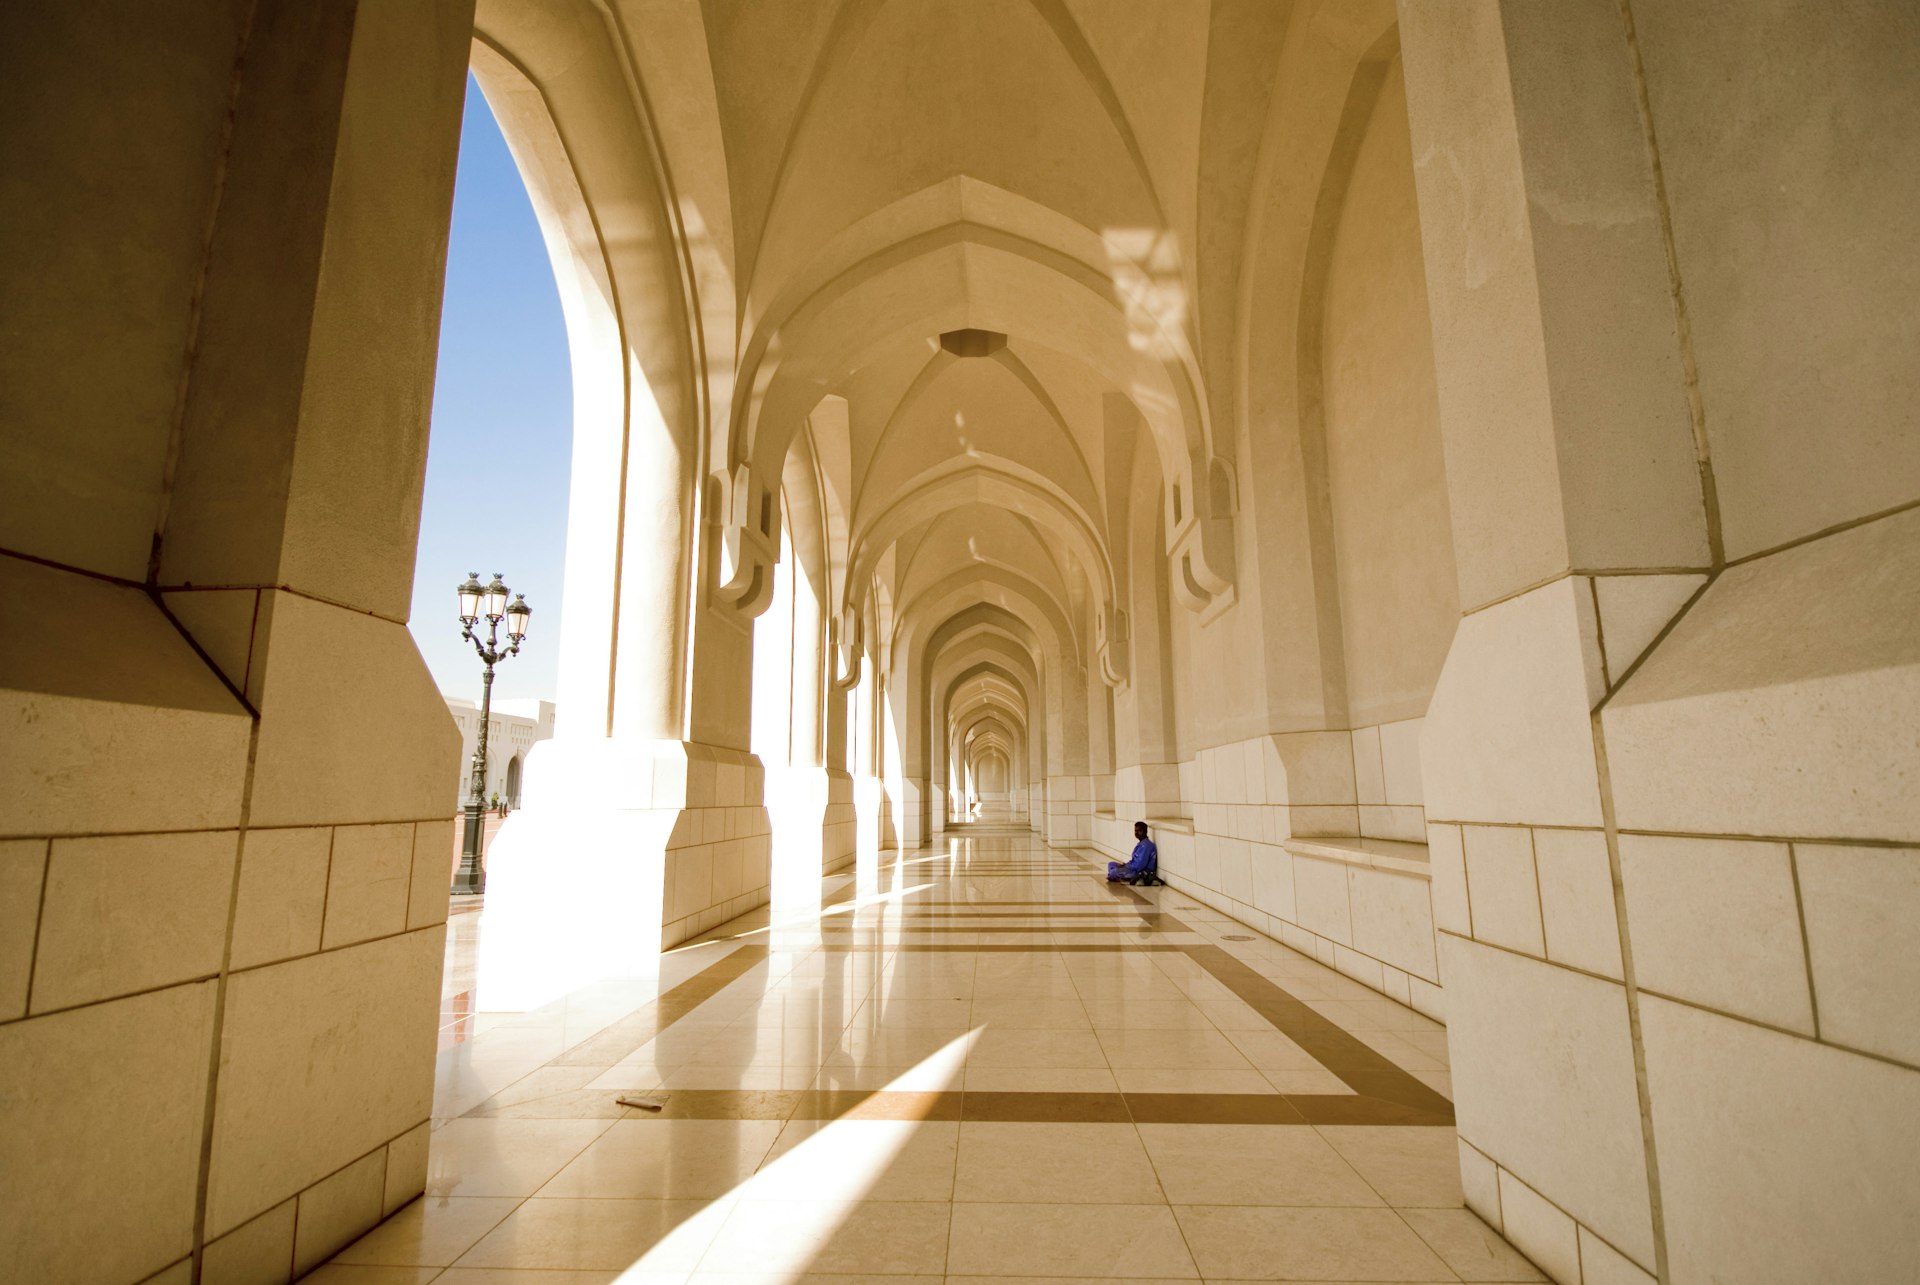 Worker rests in the shade in the Sultans Palace in Muscat, Oman